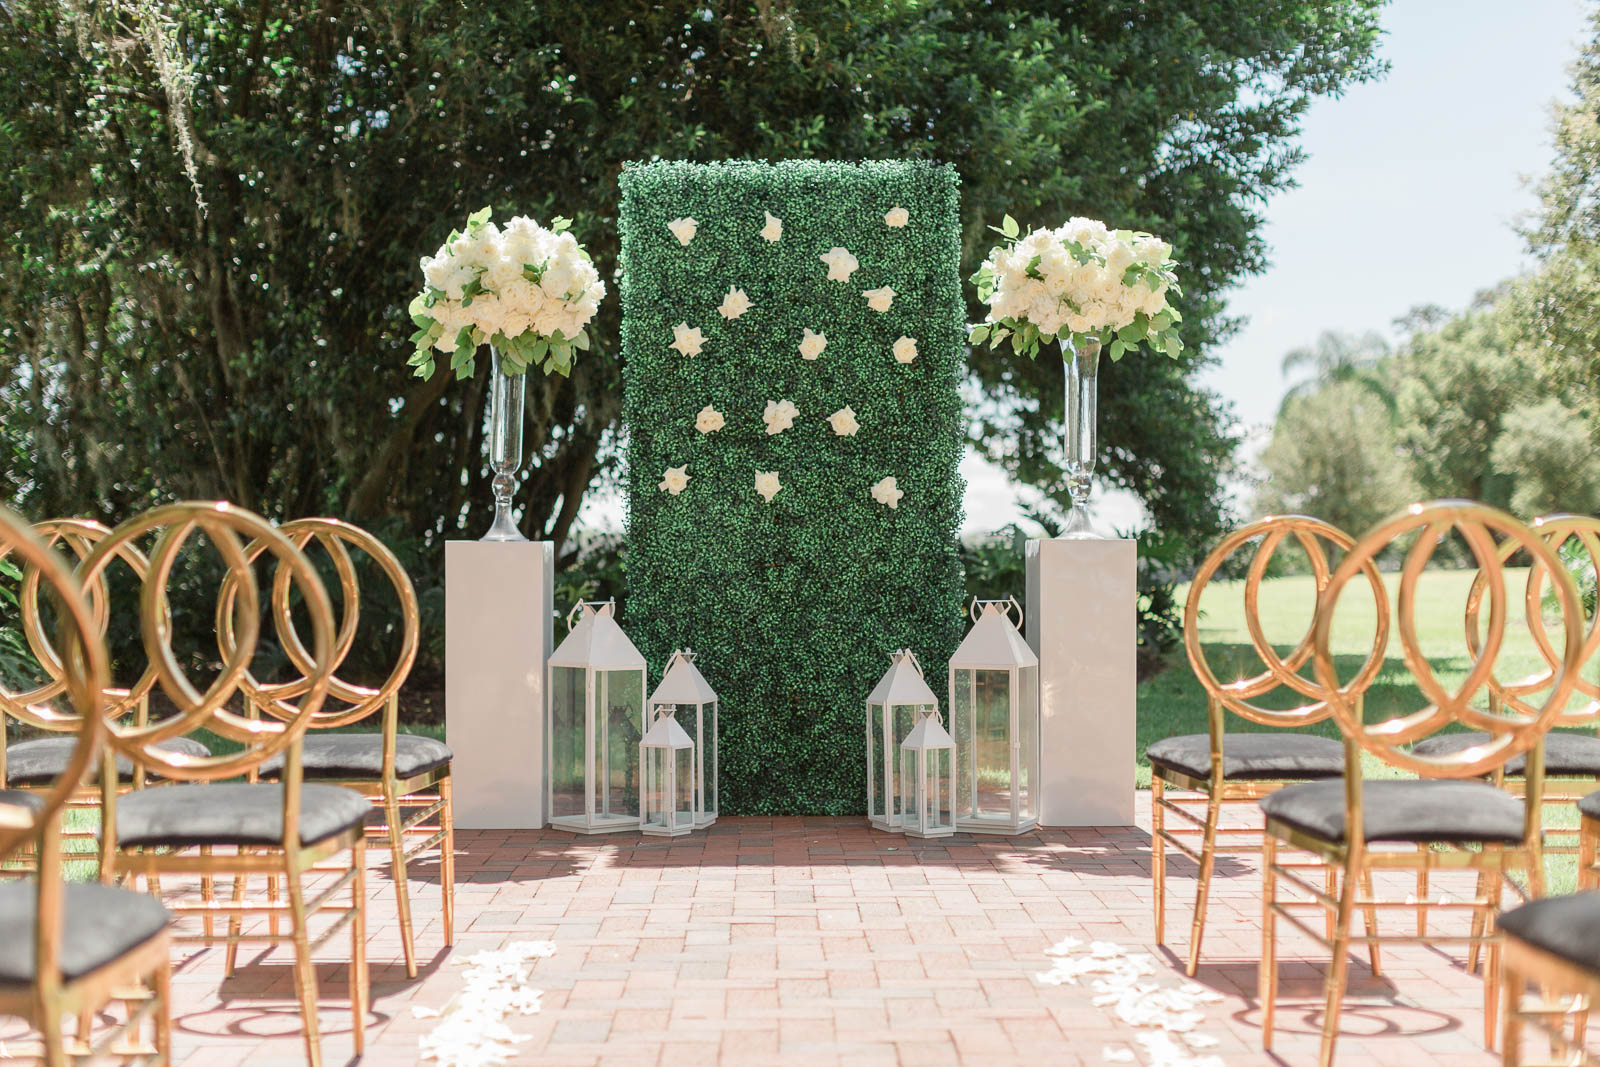 Hedge wall wedding ceremony backdrop with large white floral arrangements.